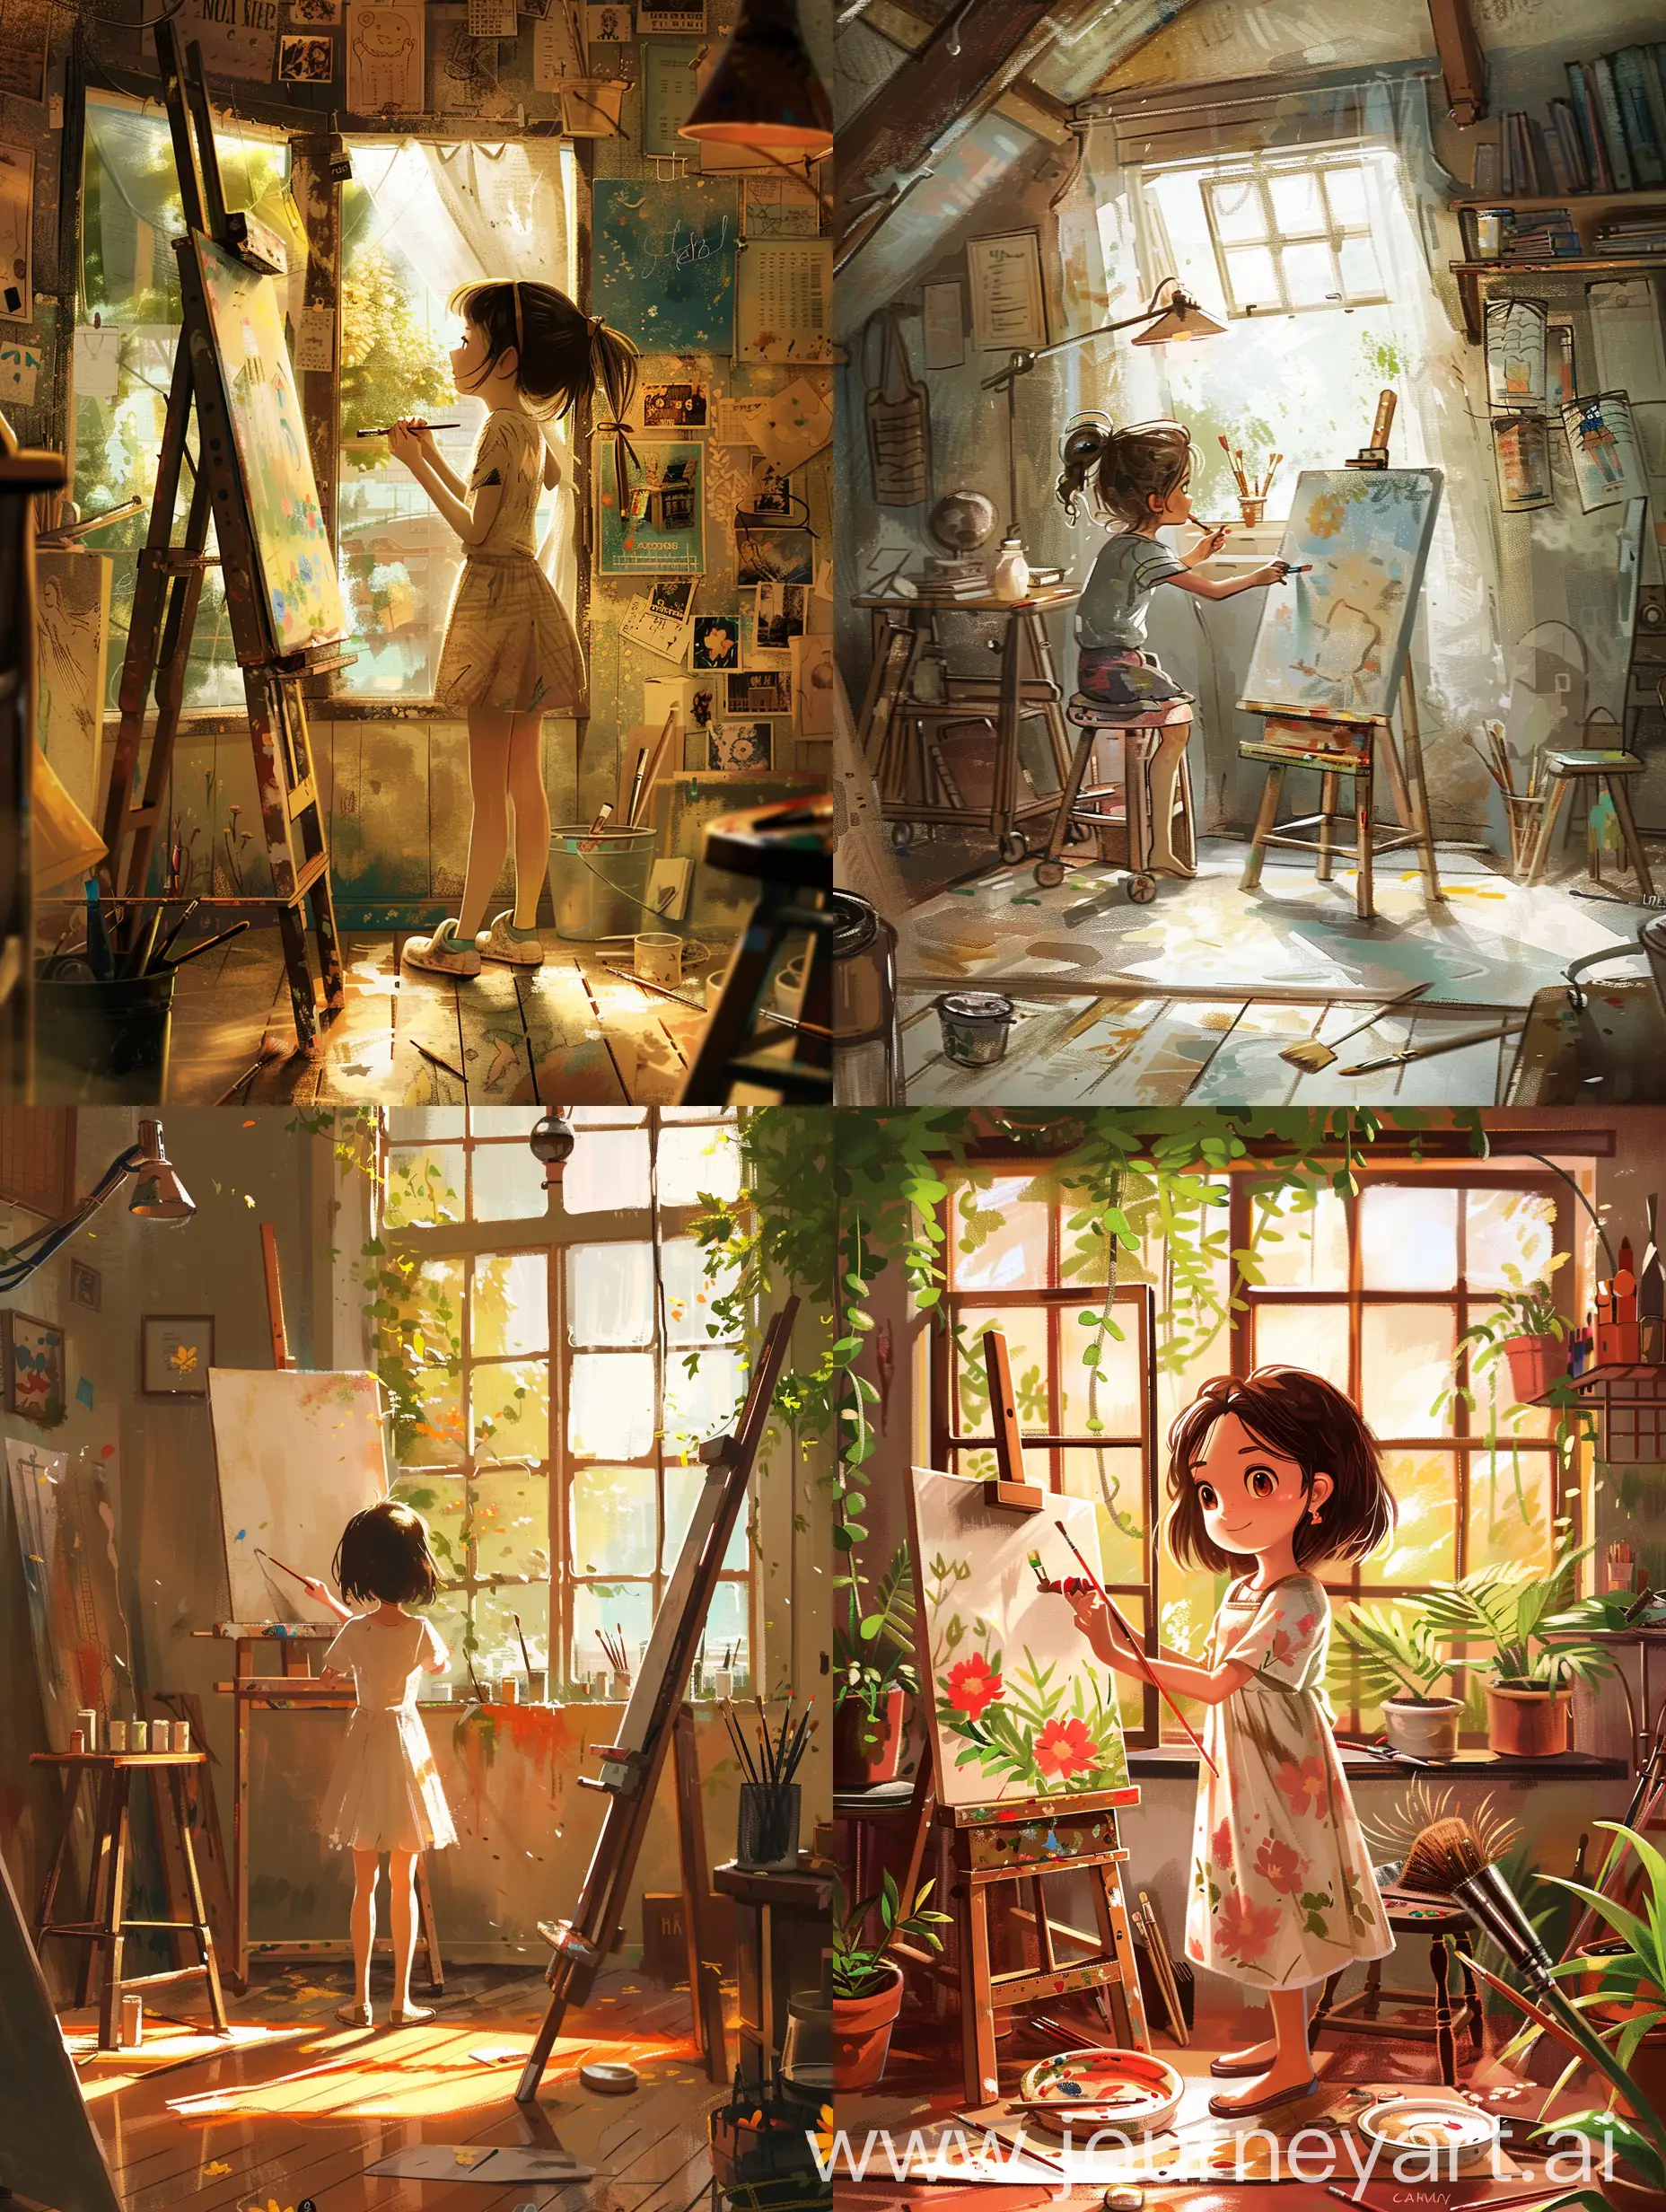 Talented-Girl-Creating-Art-HighDefinition-Painting-Scene